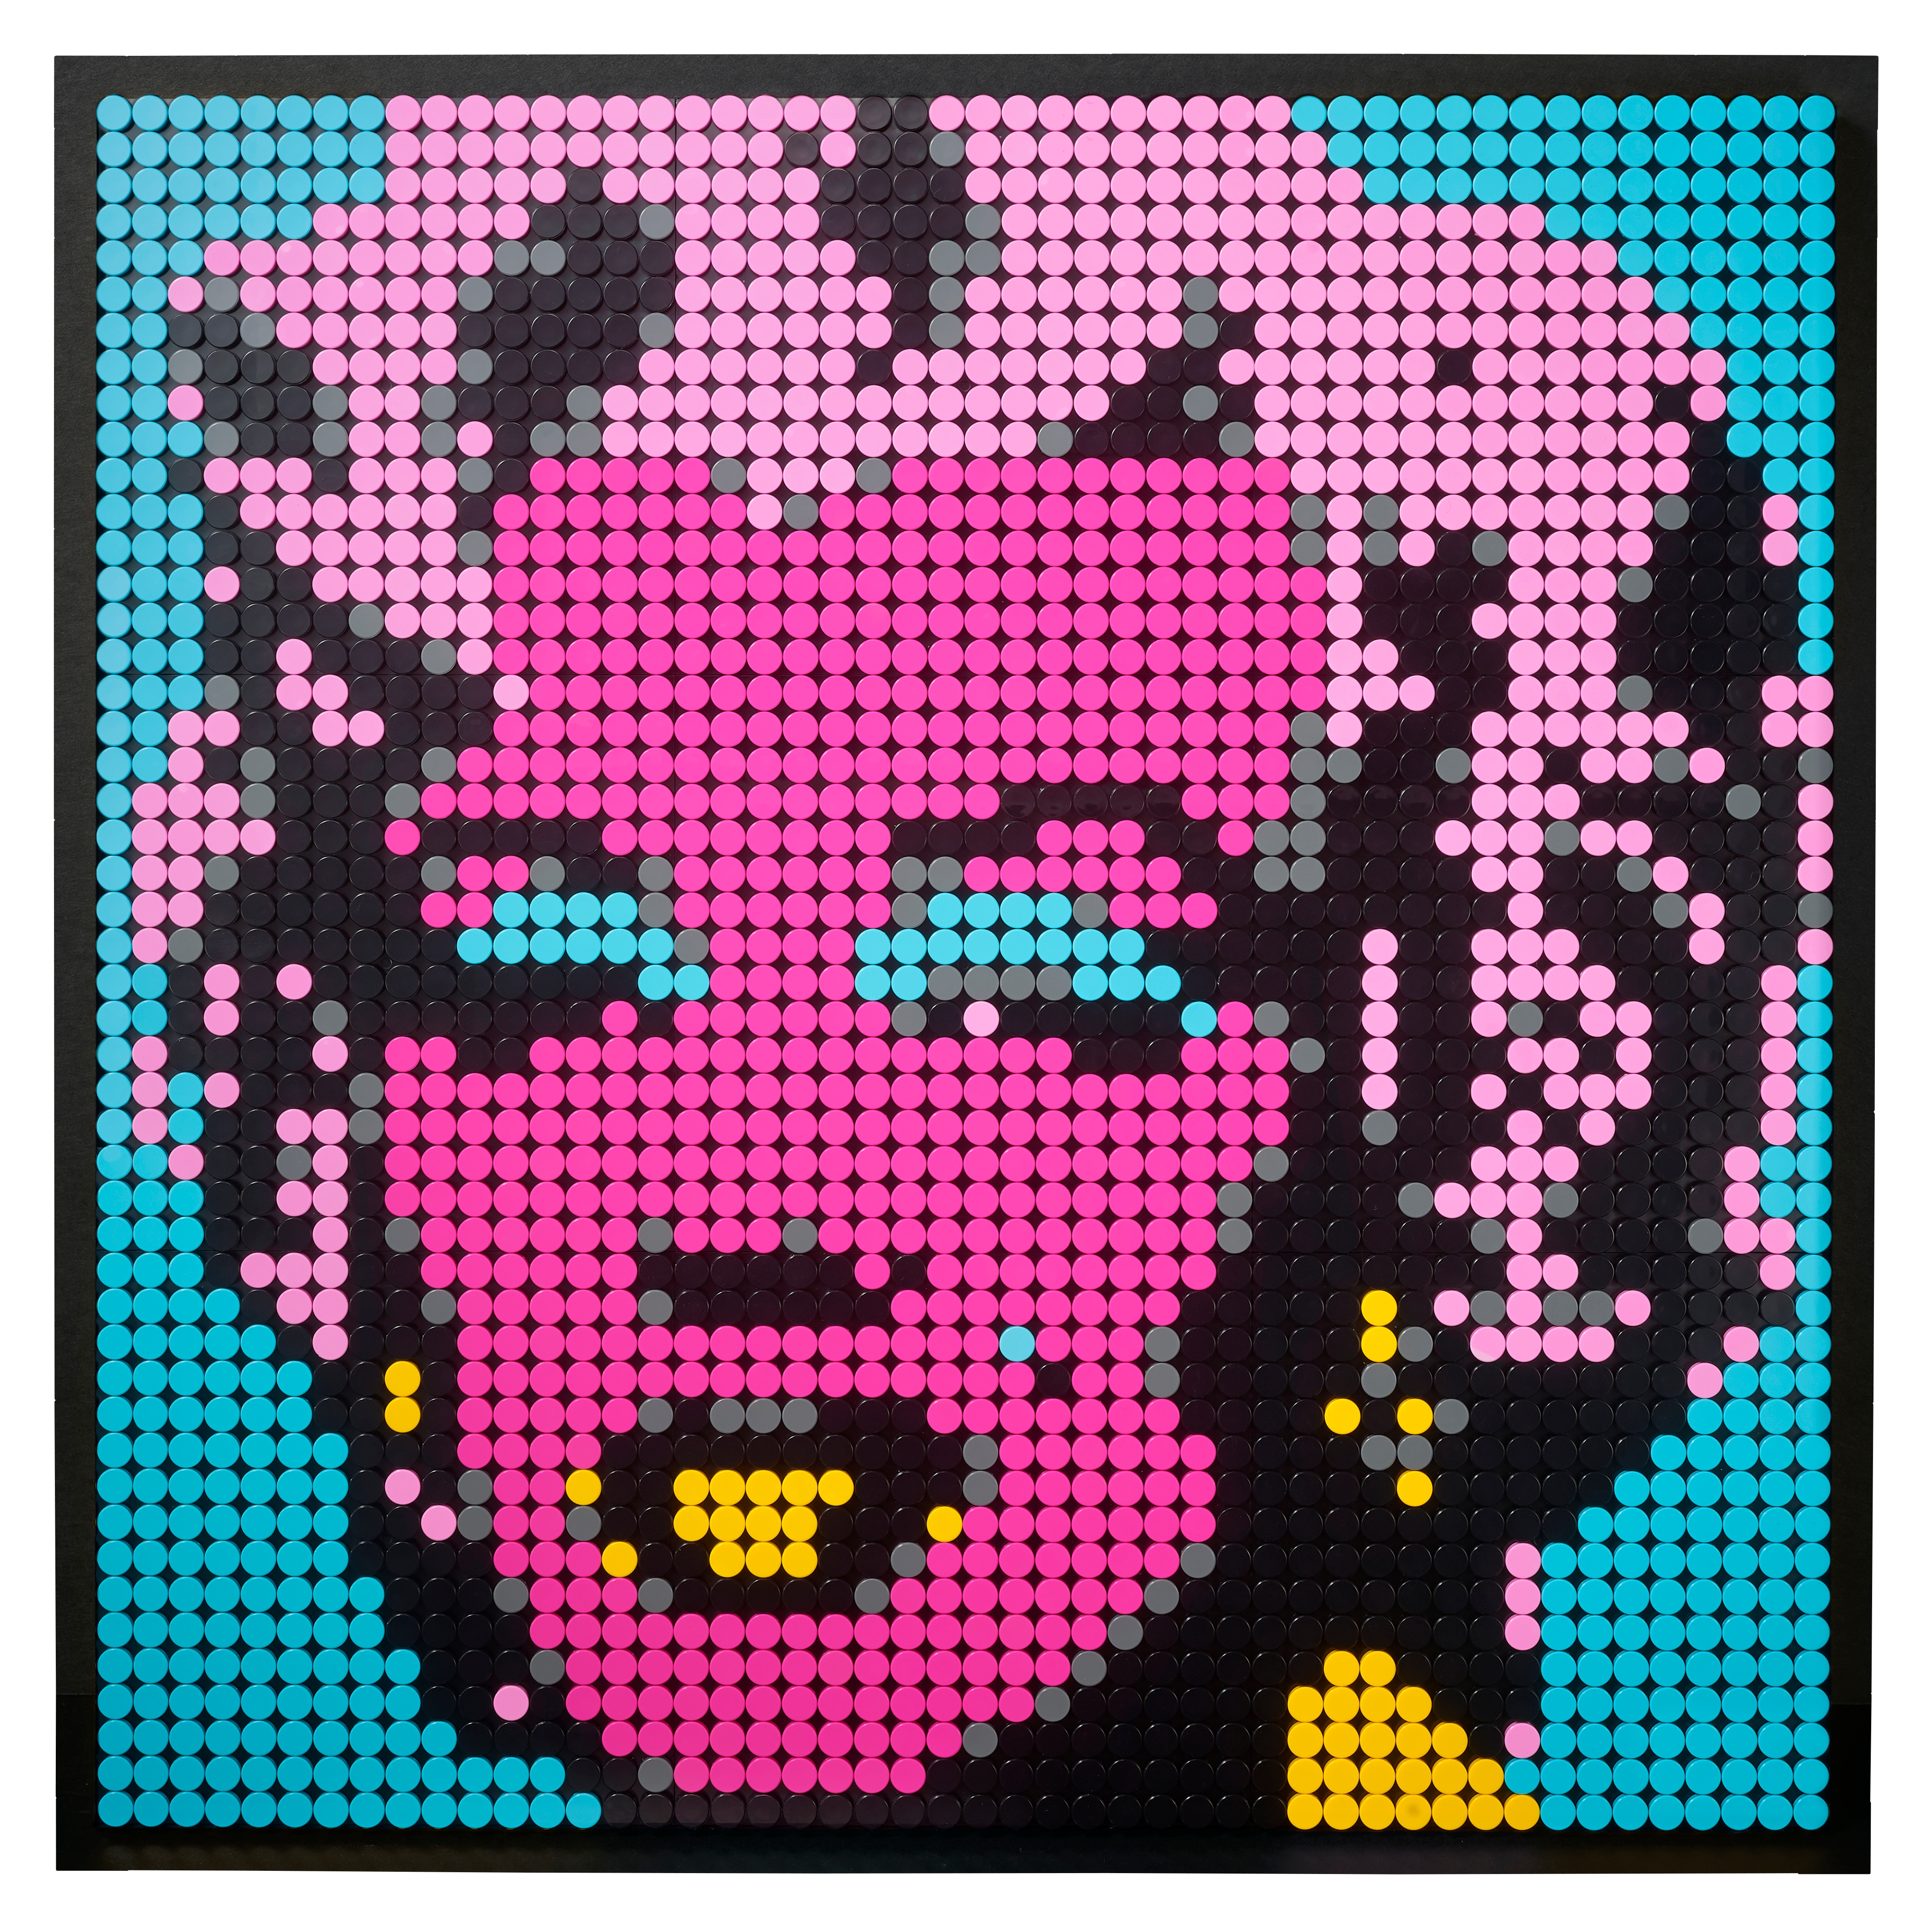 LEGO Warhol Marilyn Monroe 31197 3341 Pieces New and Sealed 